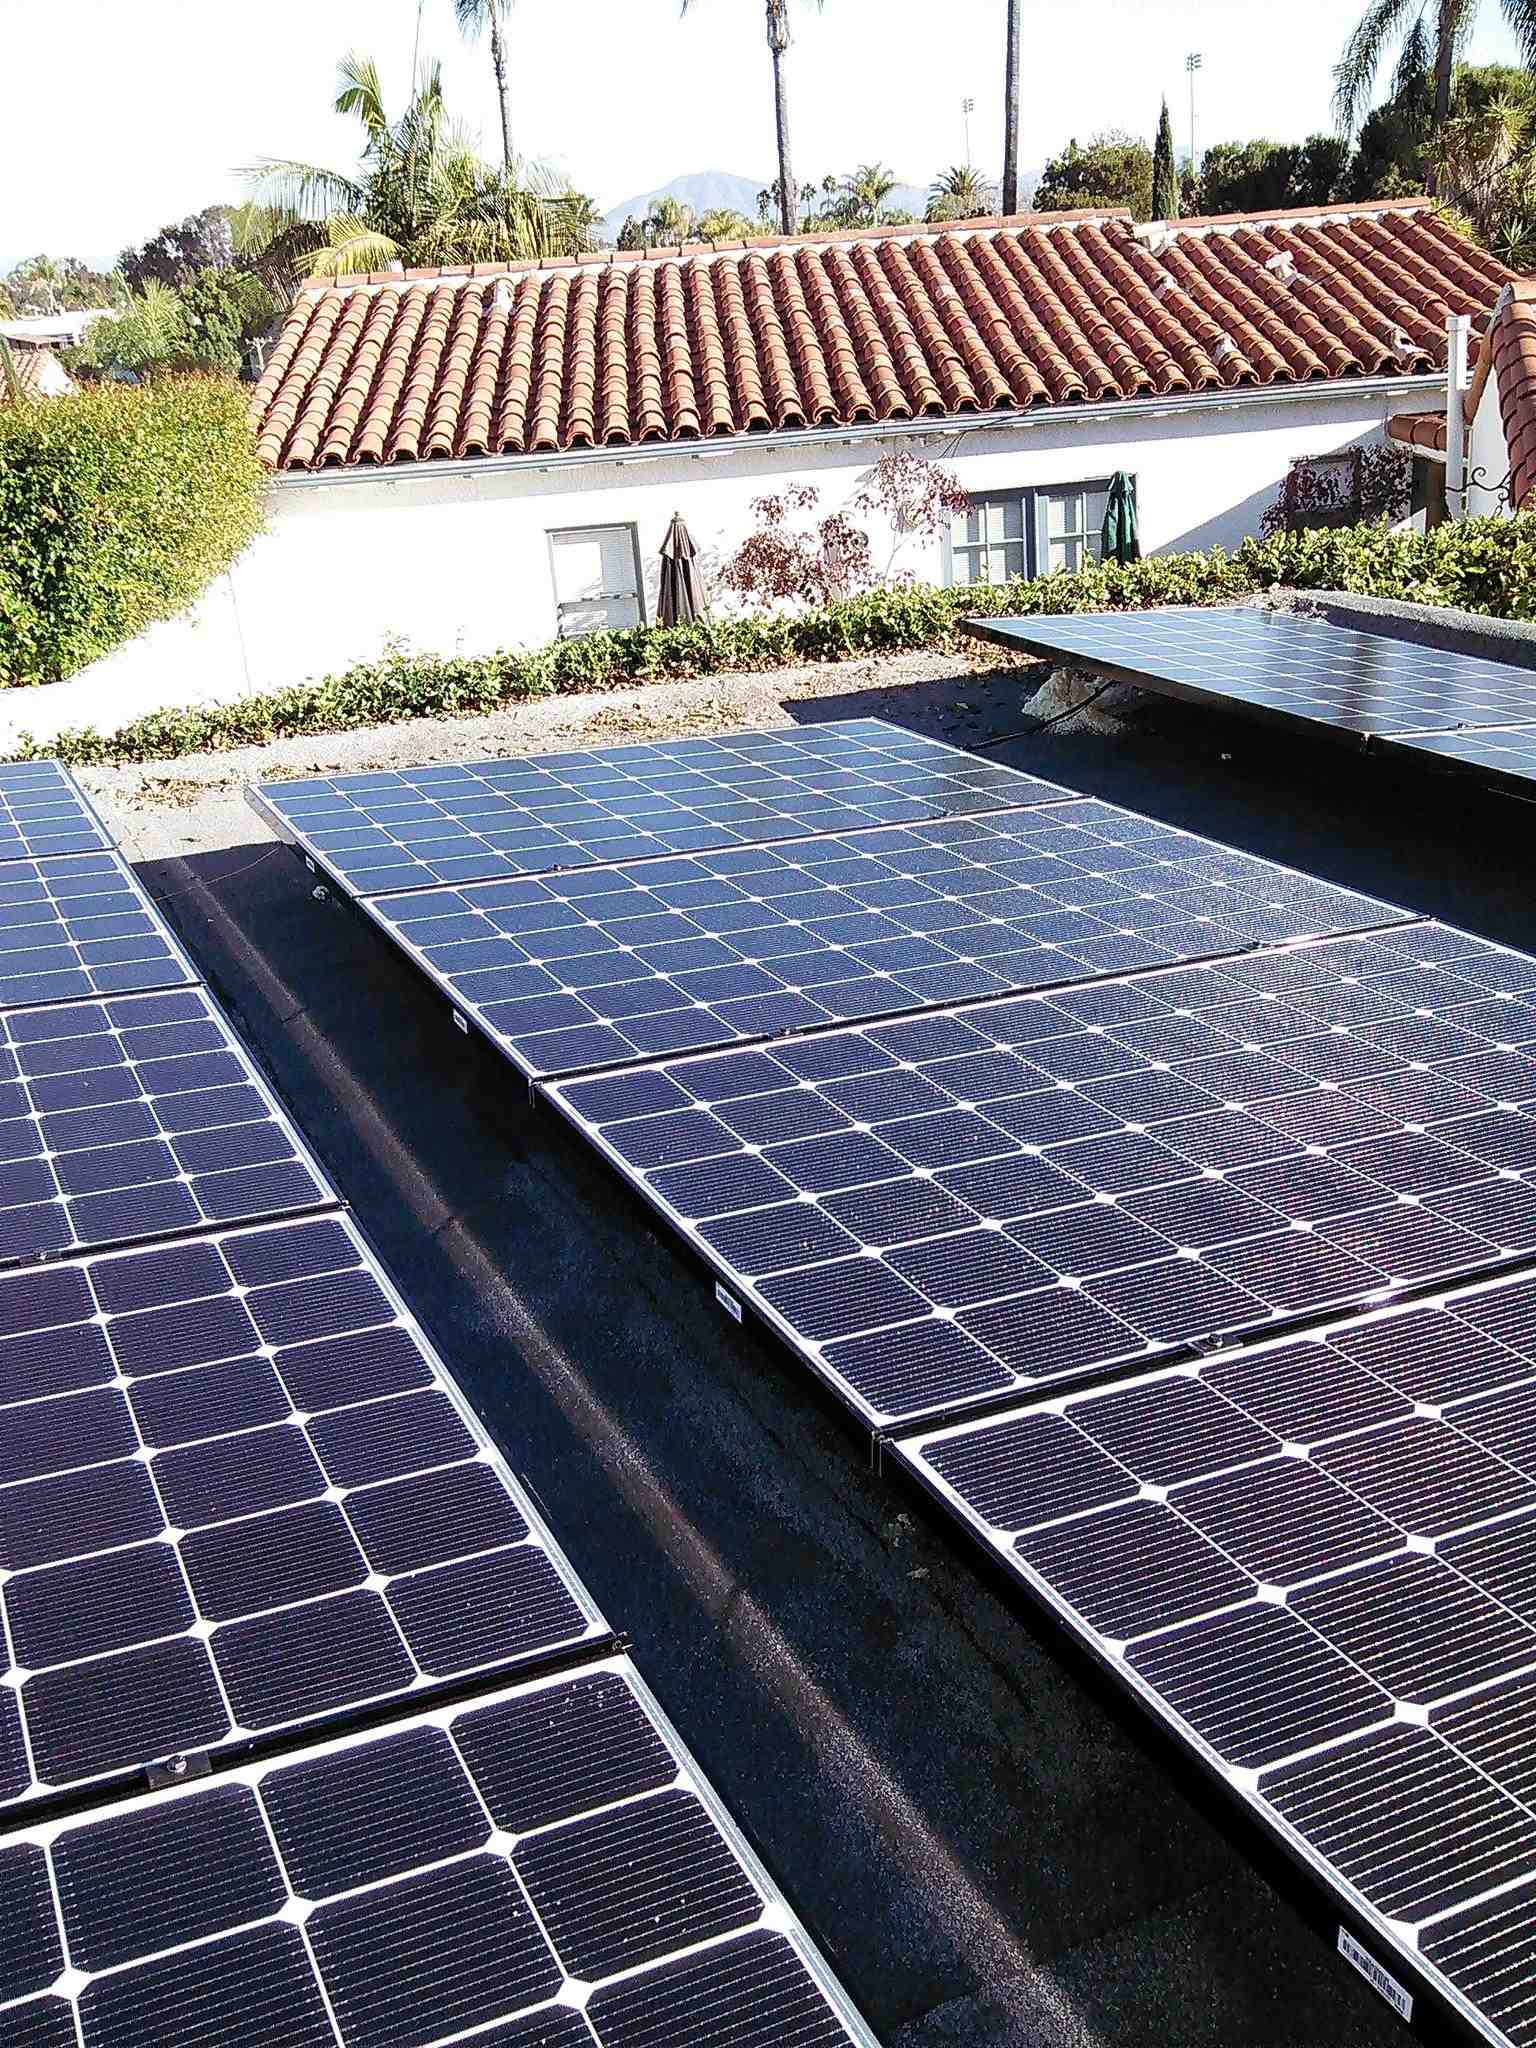 What does a typical solar installation cost?